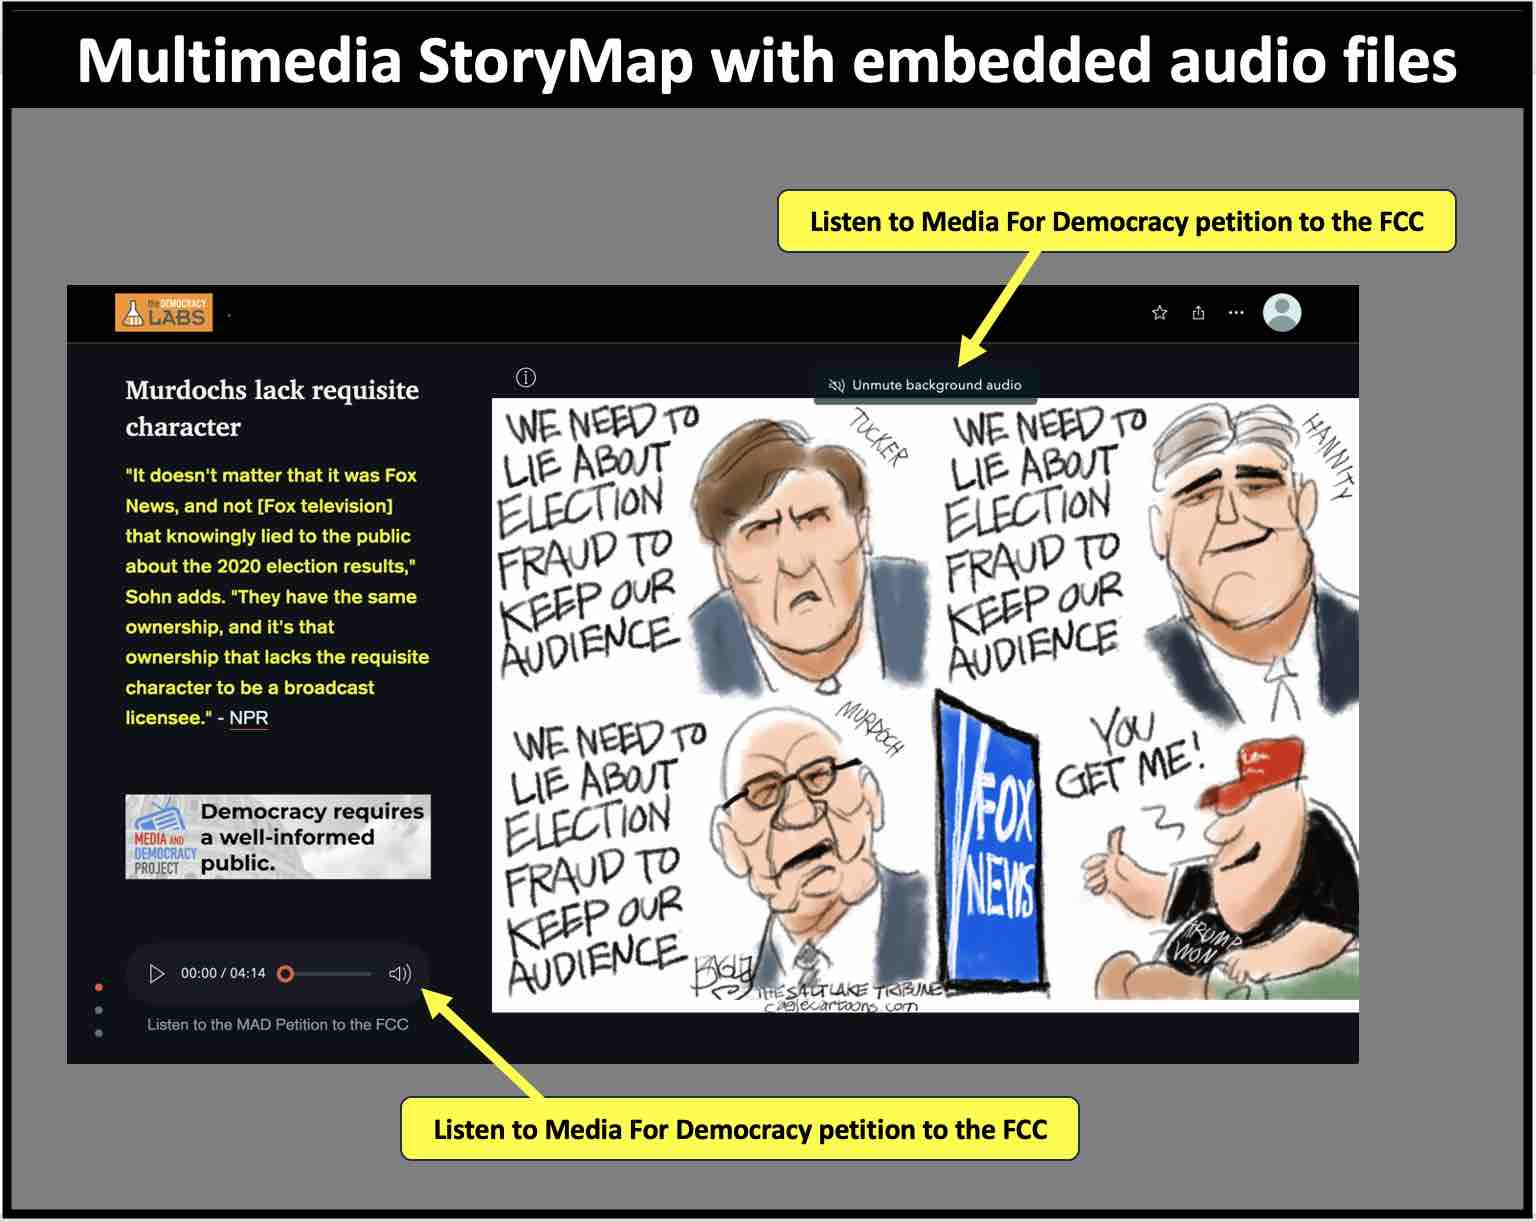 Embed audio files in StoryMap to make it easier for readers to understand